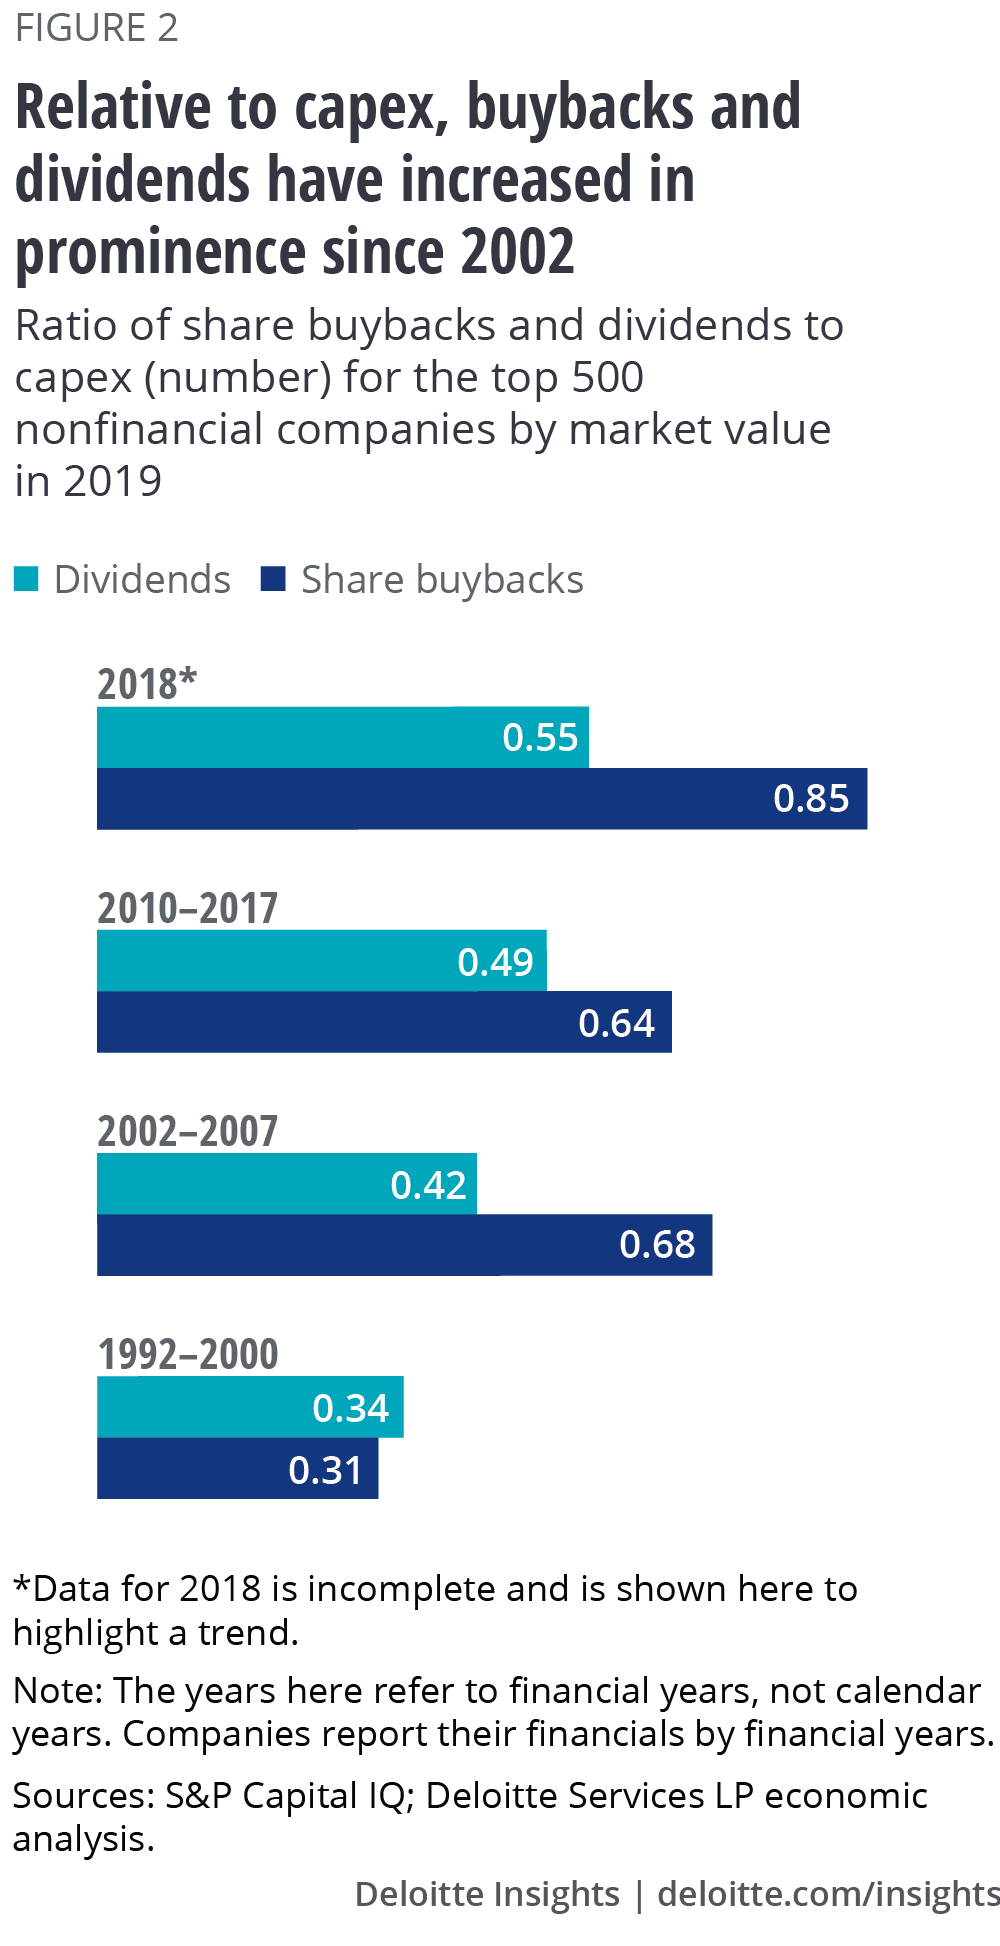 Relative to capex, buybacks and dividends have increased in prominence since 2002